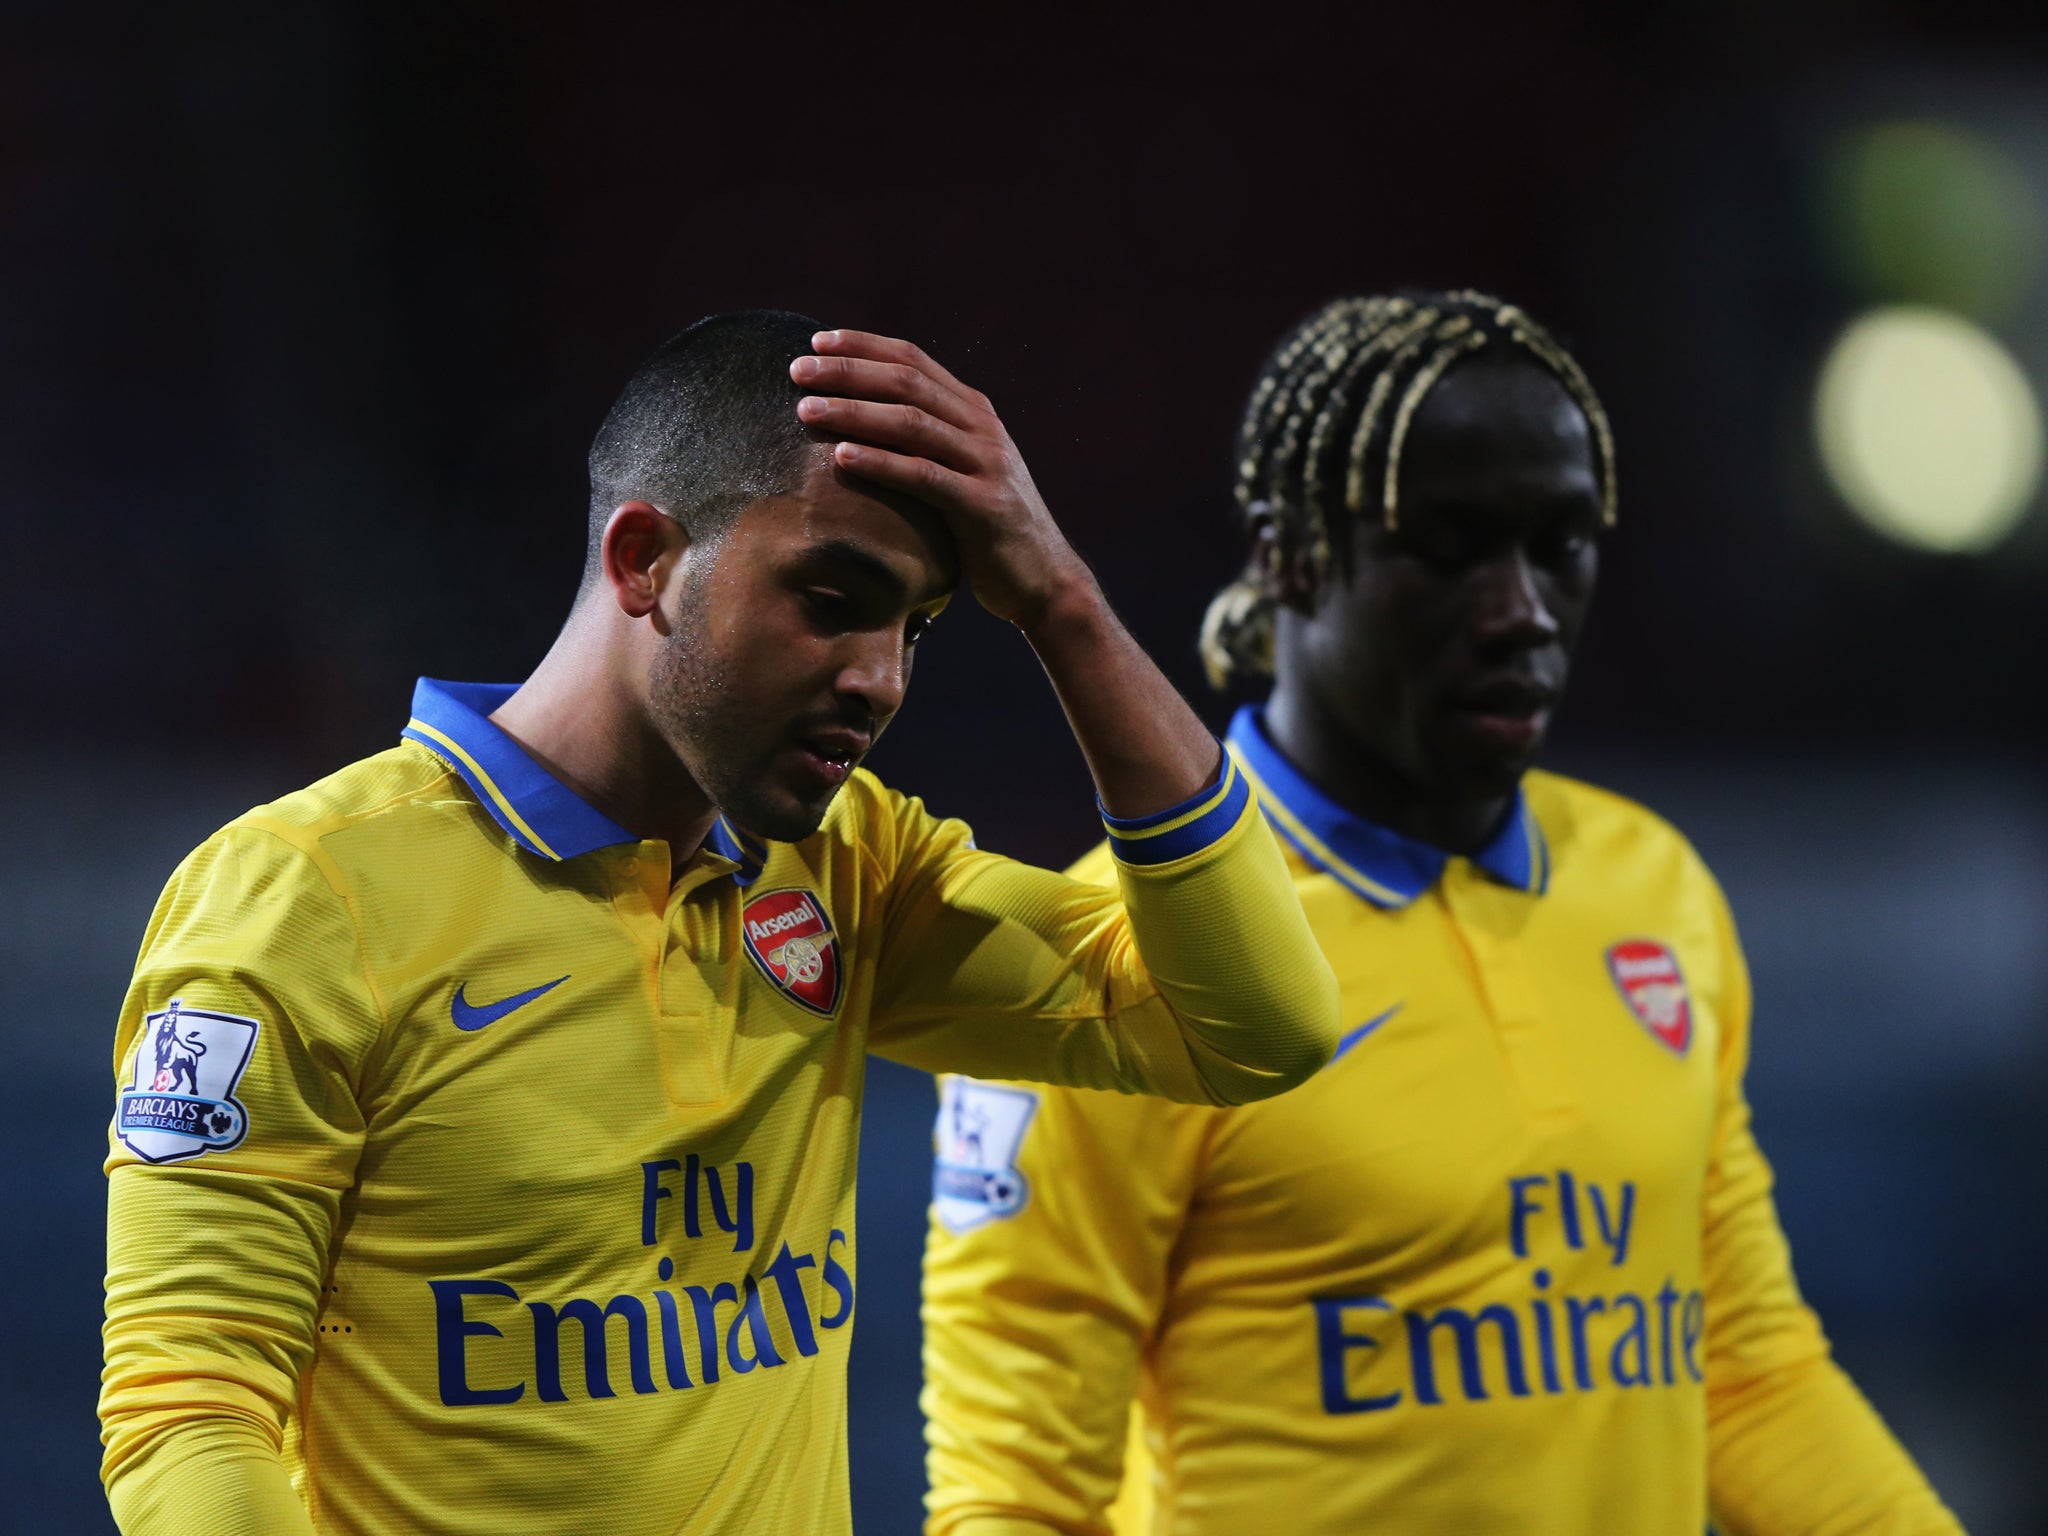 Theo Walcott speaks to teammate Bacary Sagna after his two goals helped Arsenal beat West Ham 3-1